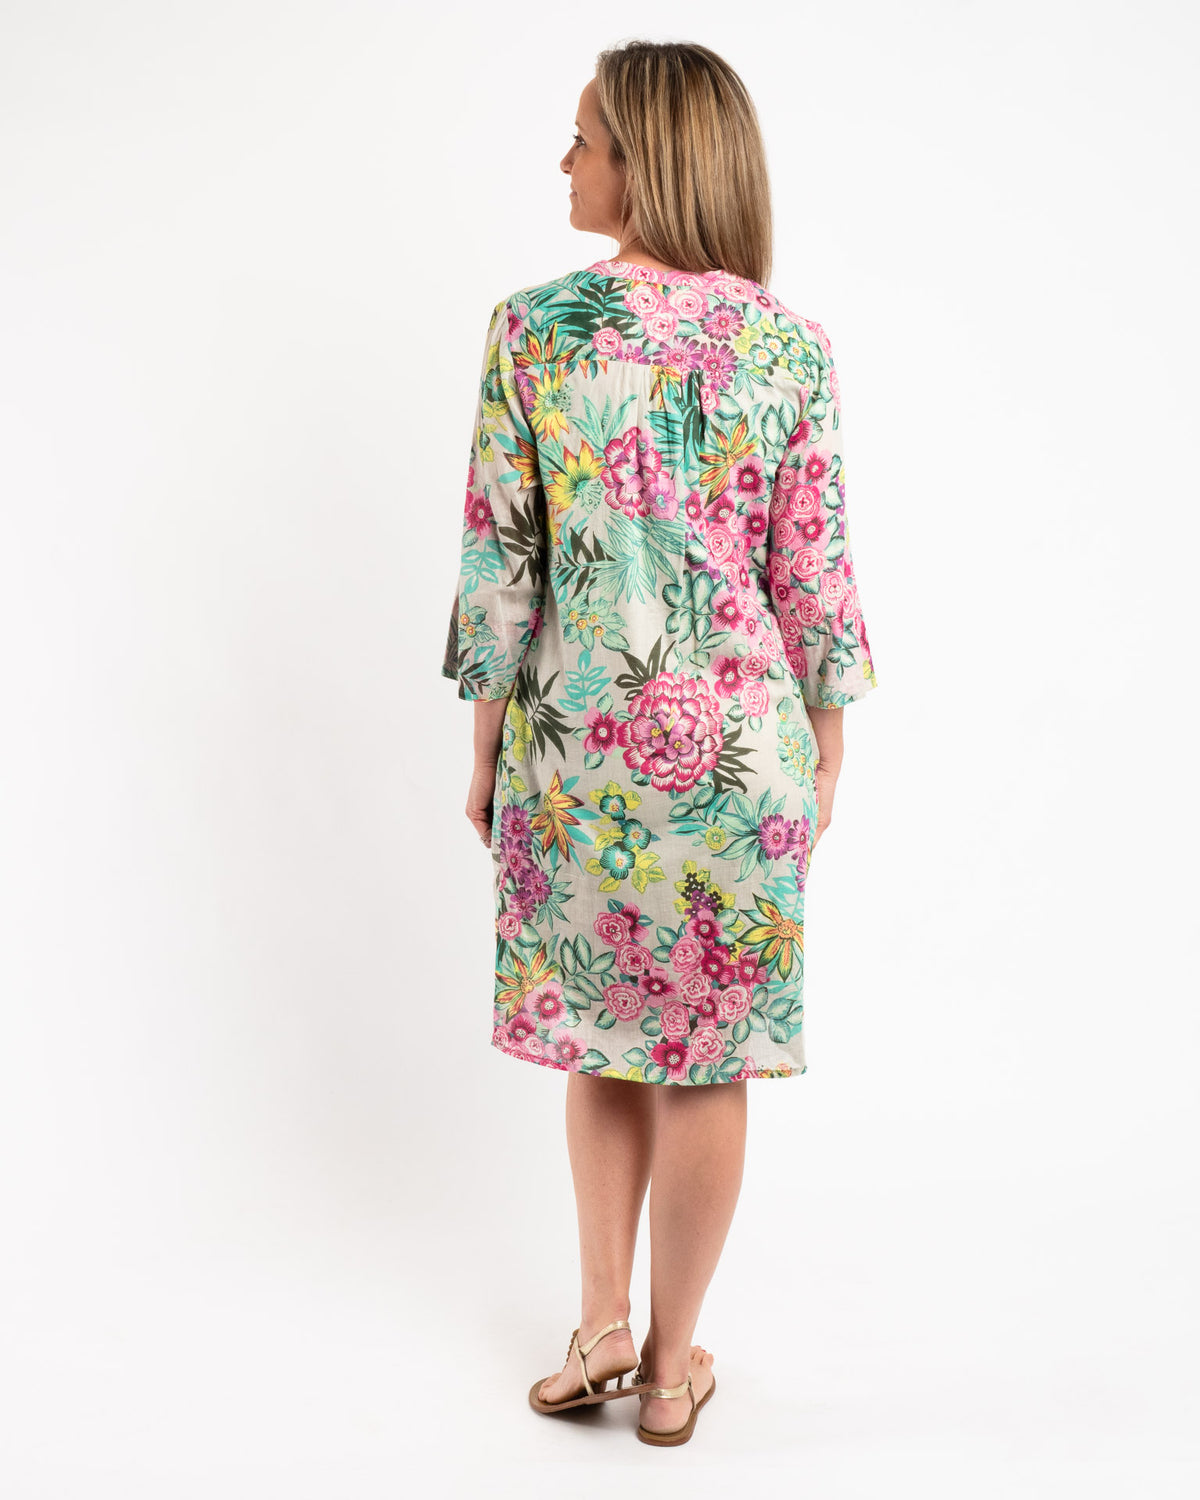 Lined Summer Dress in Pink and Pale Green Floral